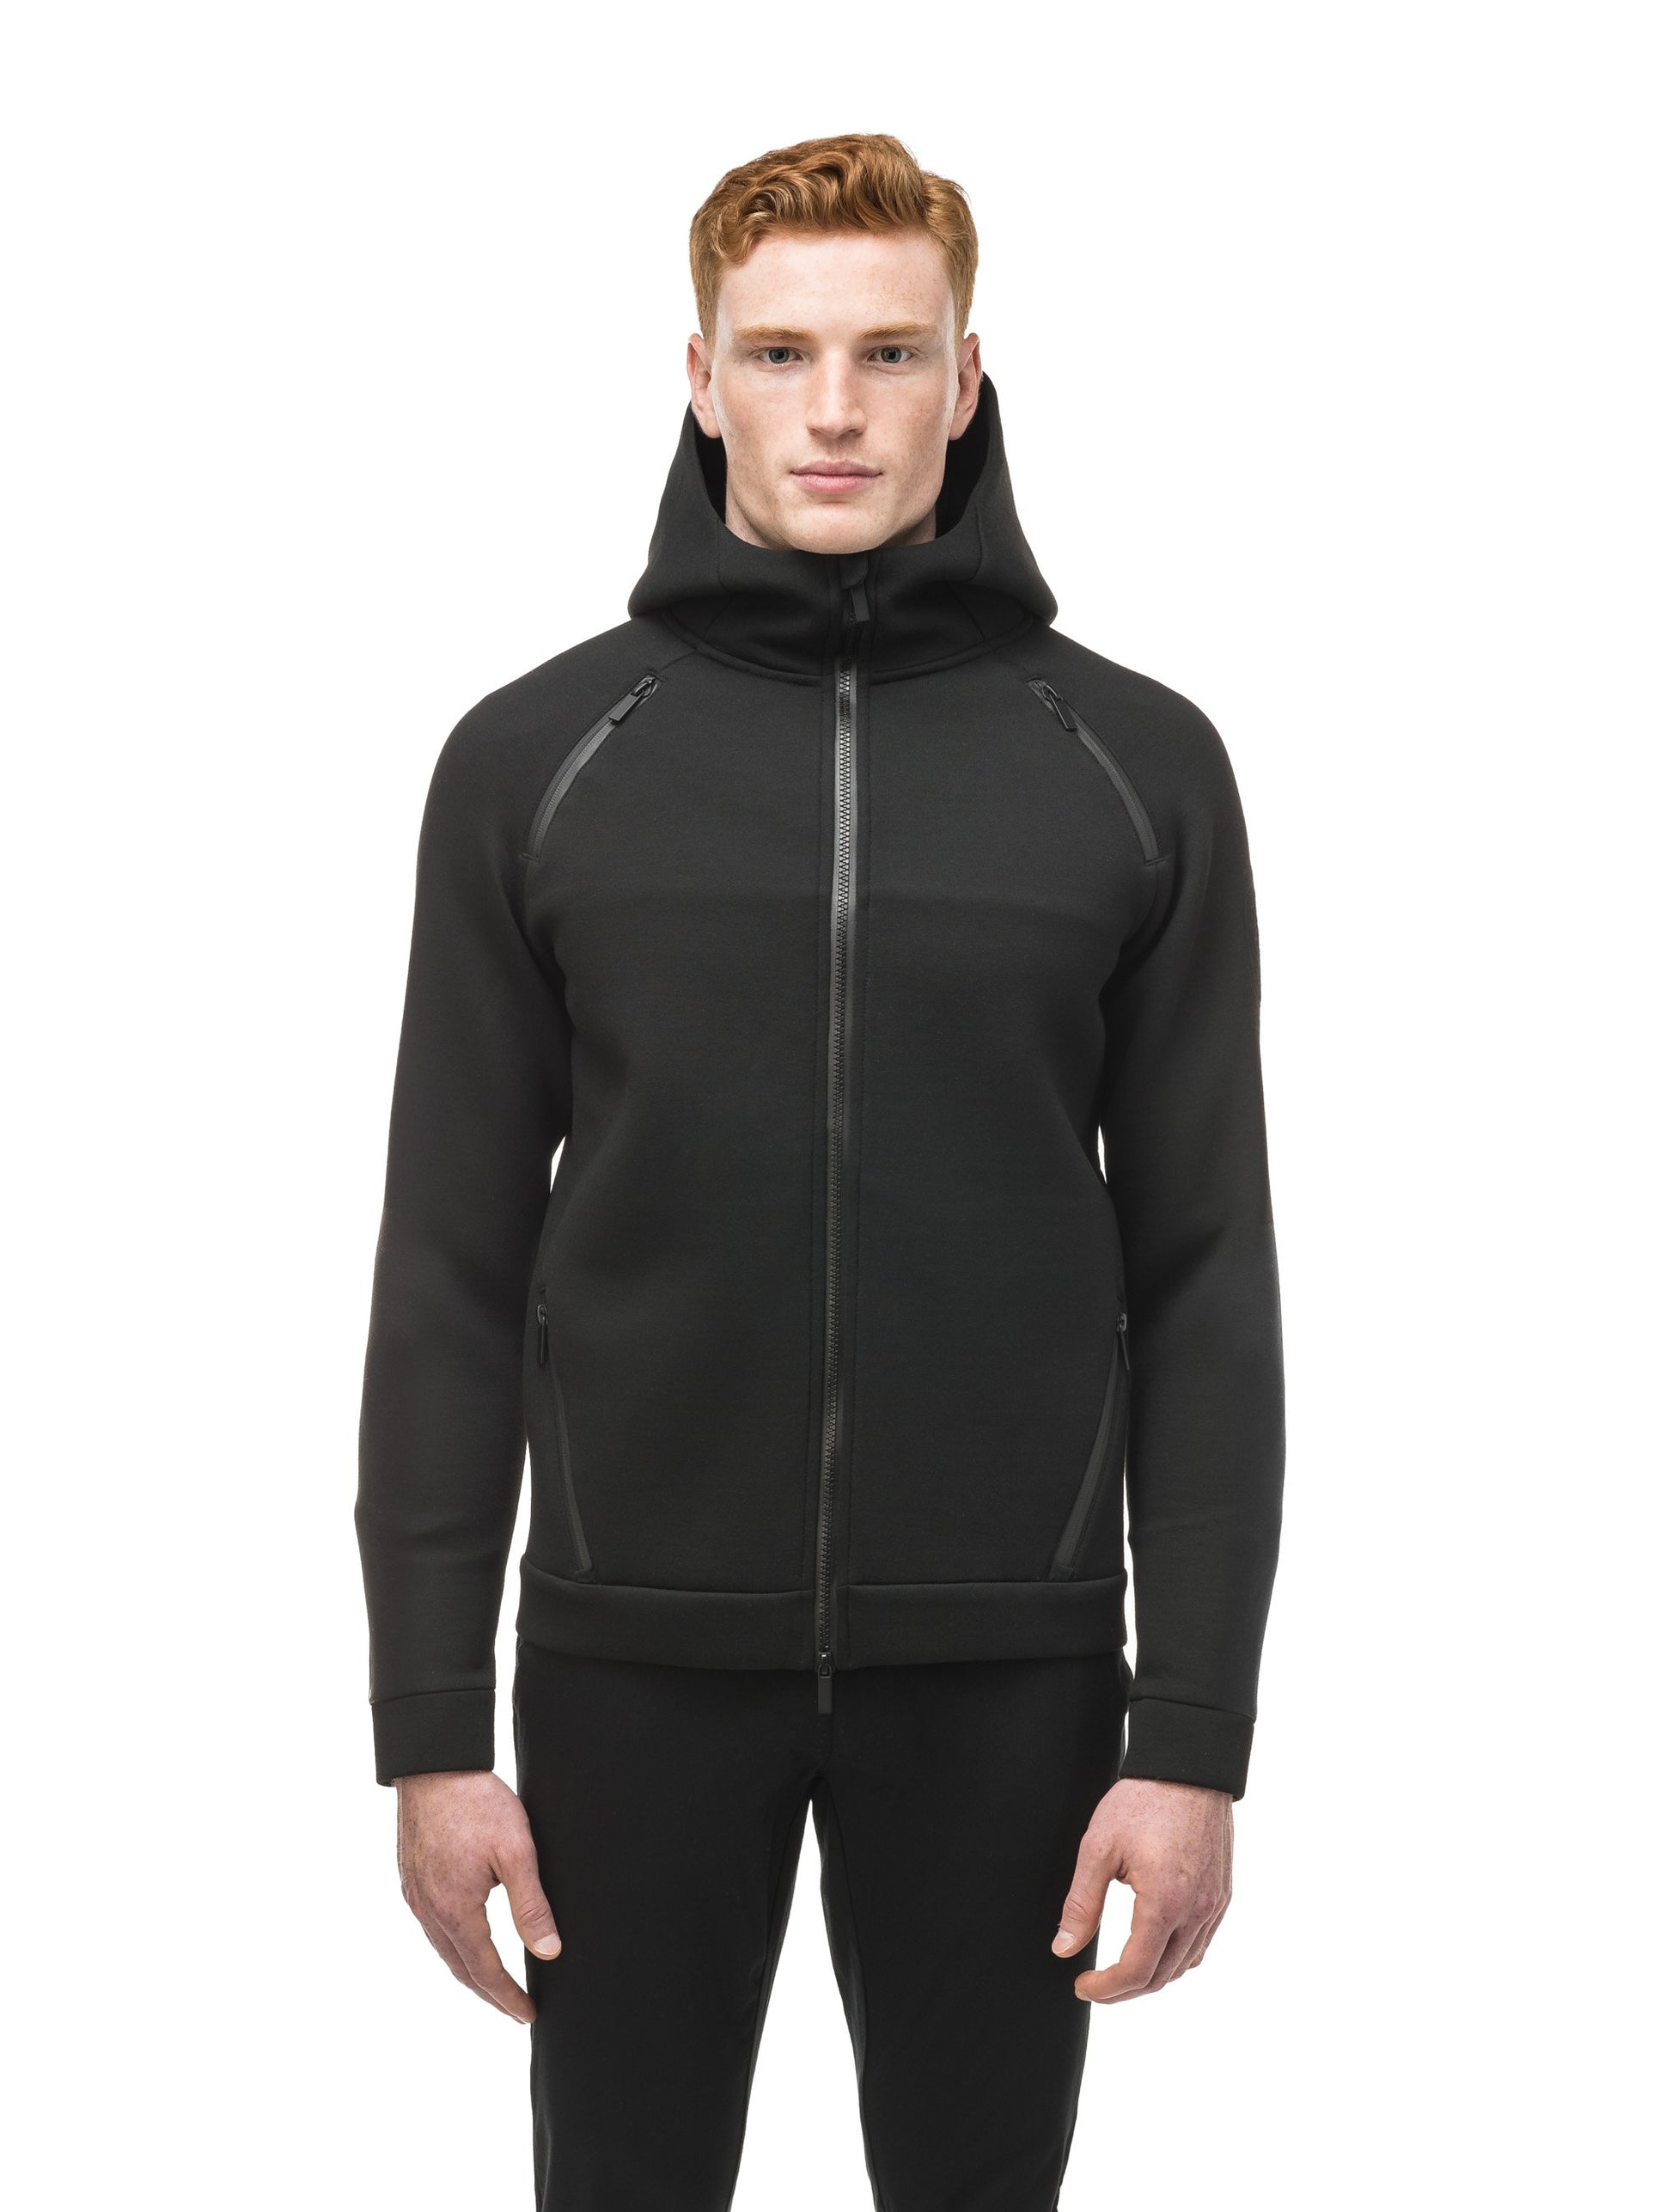 Men's premium rayon polyamide bonded jersey fabrication hoodie with exposed zipper in Black